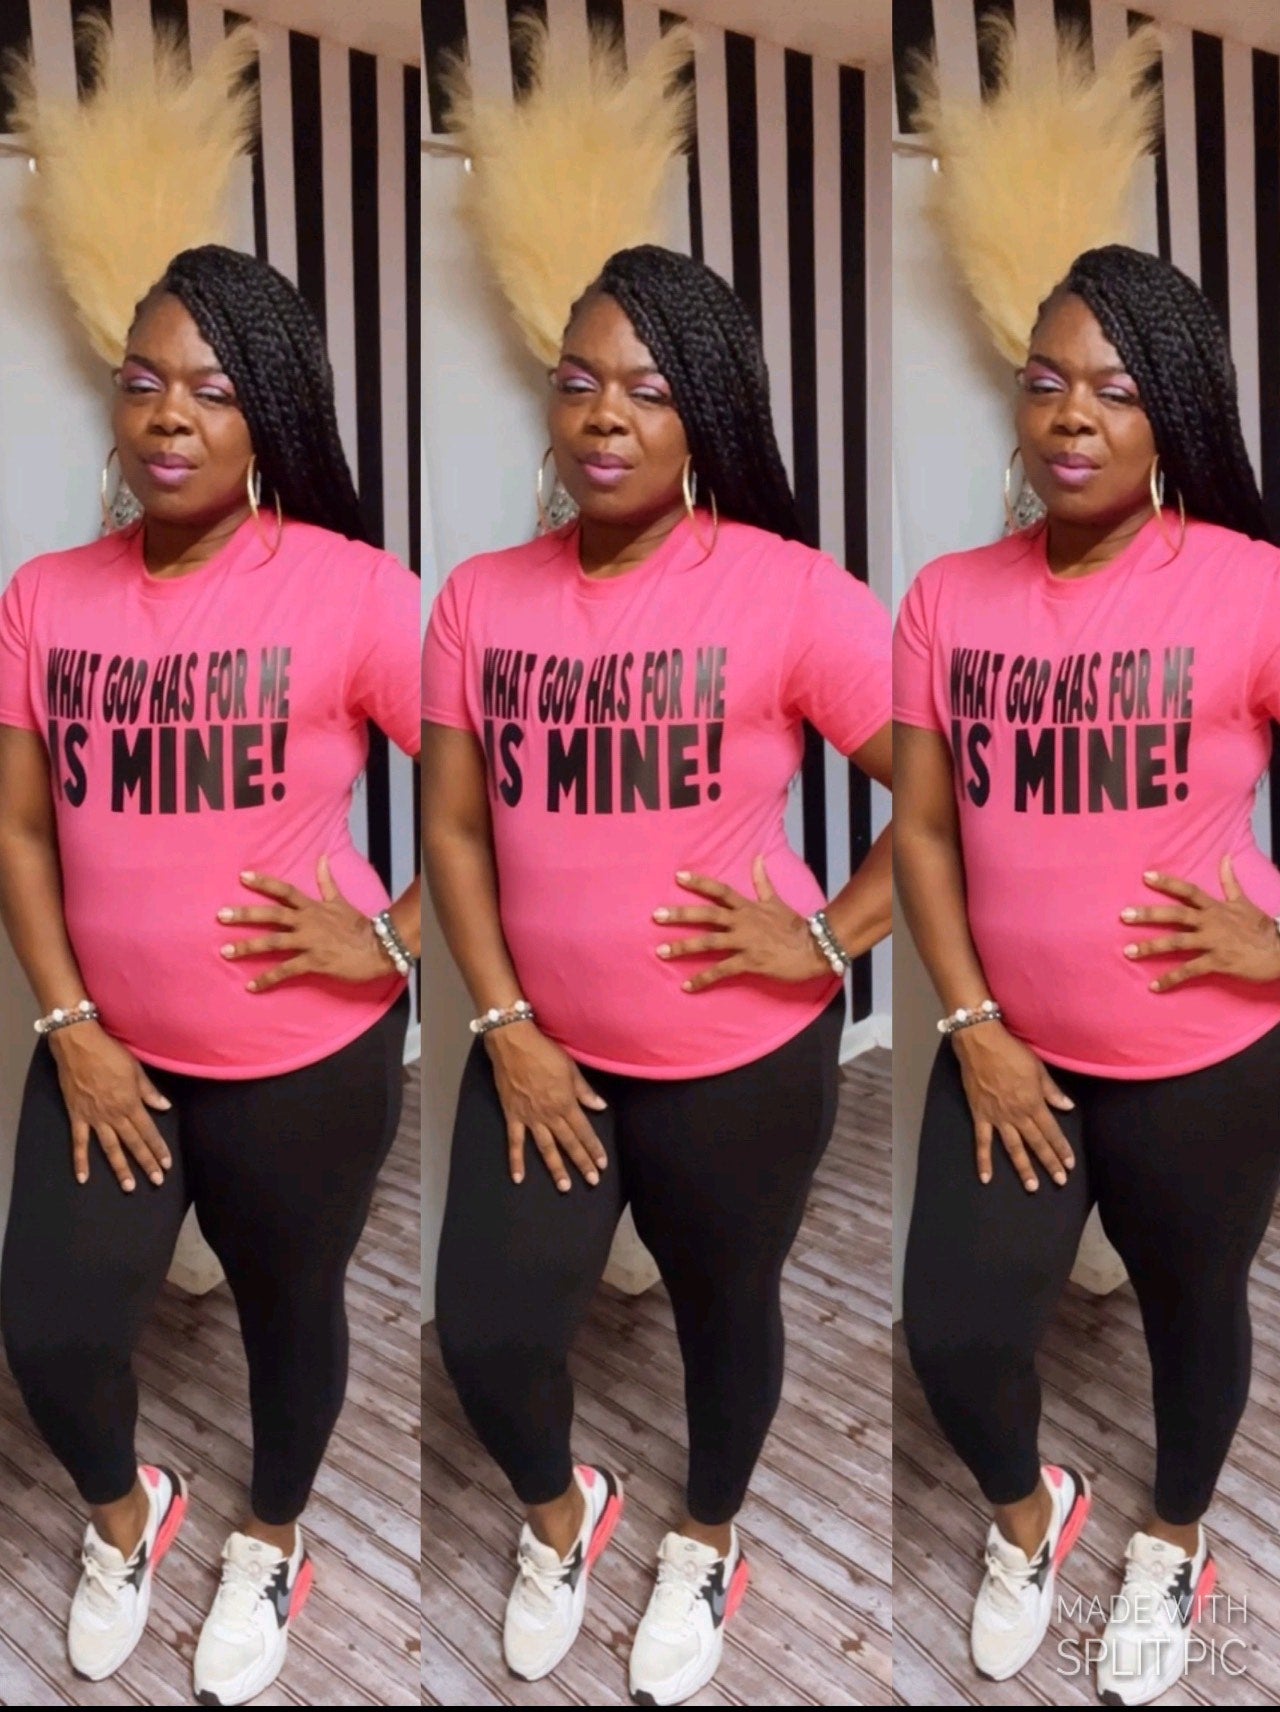 “What God has For me is Mine” Crew Neck Graphic Tee” in Hot Pink” (Plus)💕